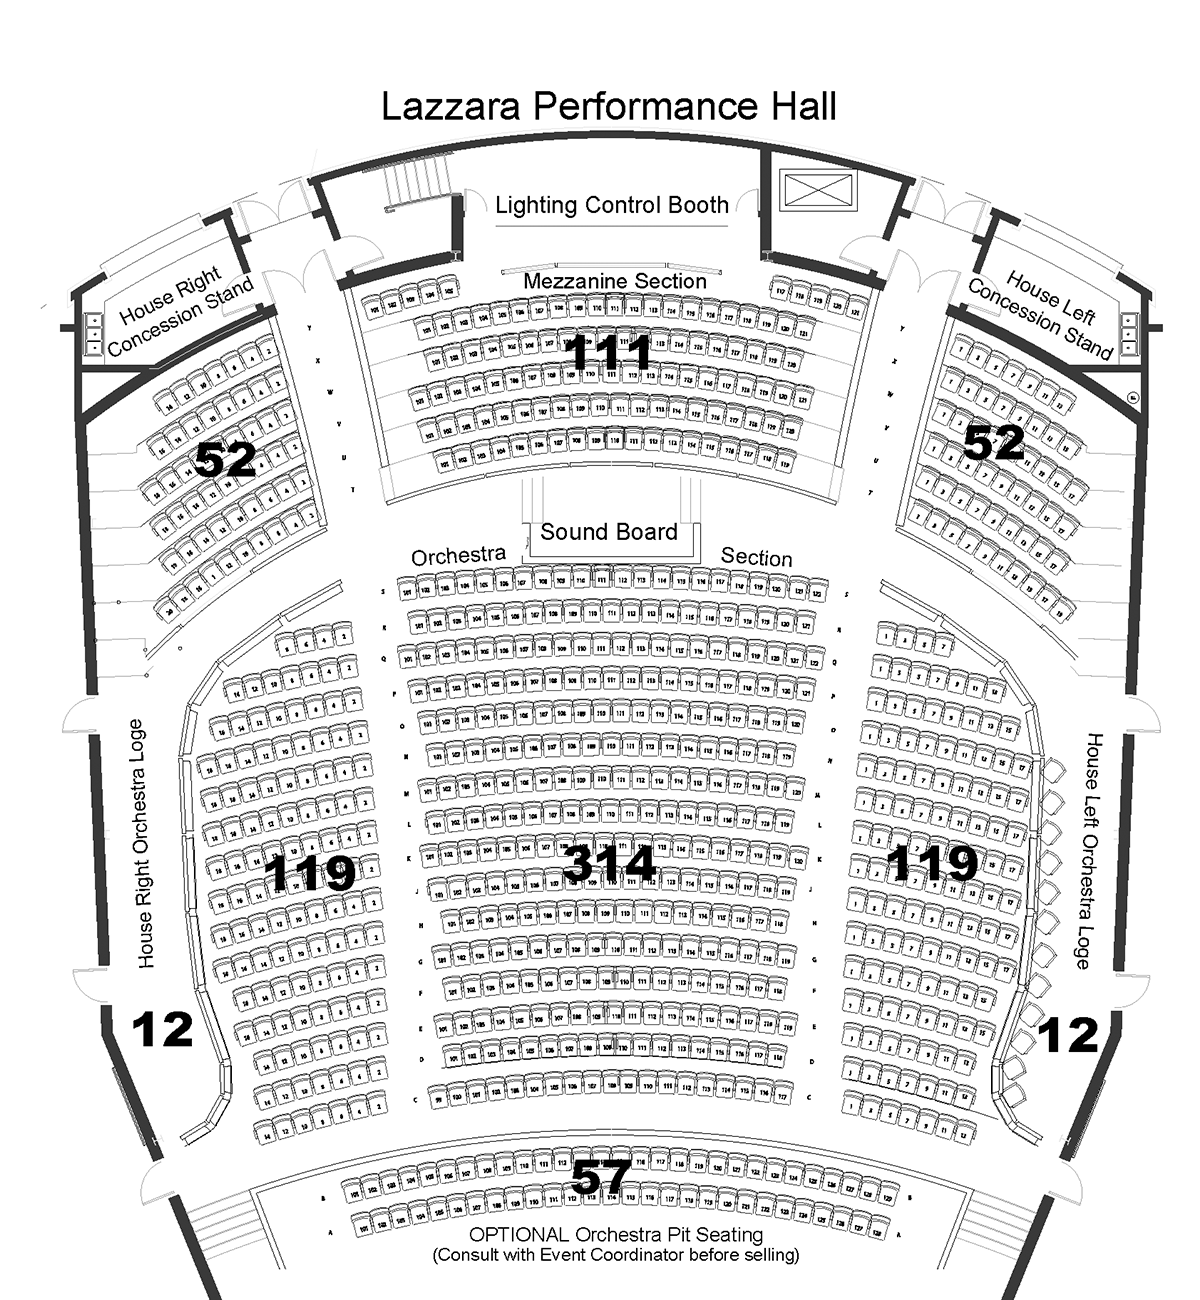 Seating chart for Lazzara Performance Hall Orchestra and Mezzanine